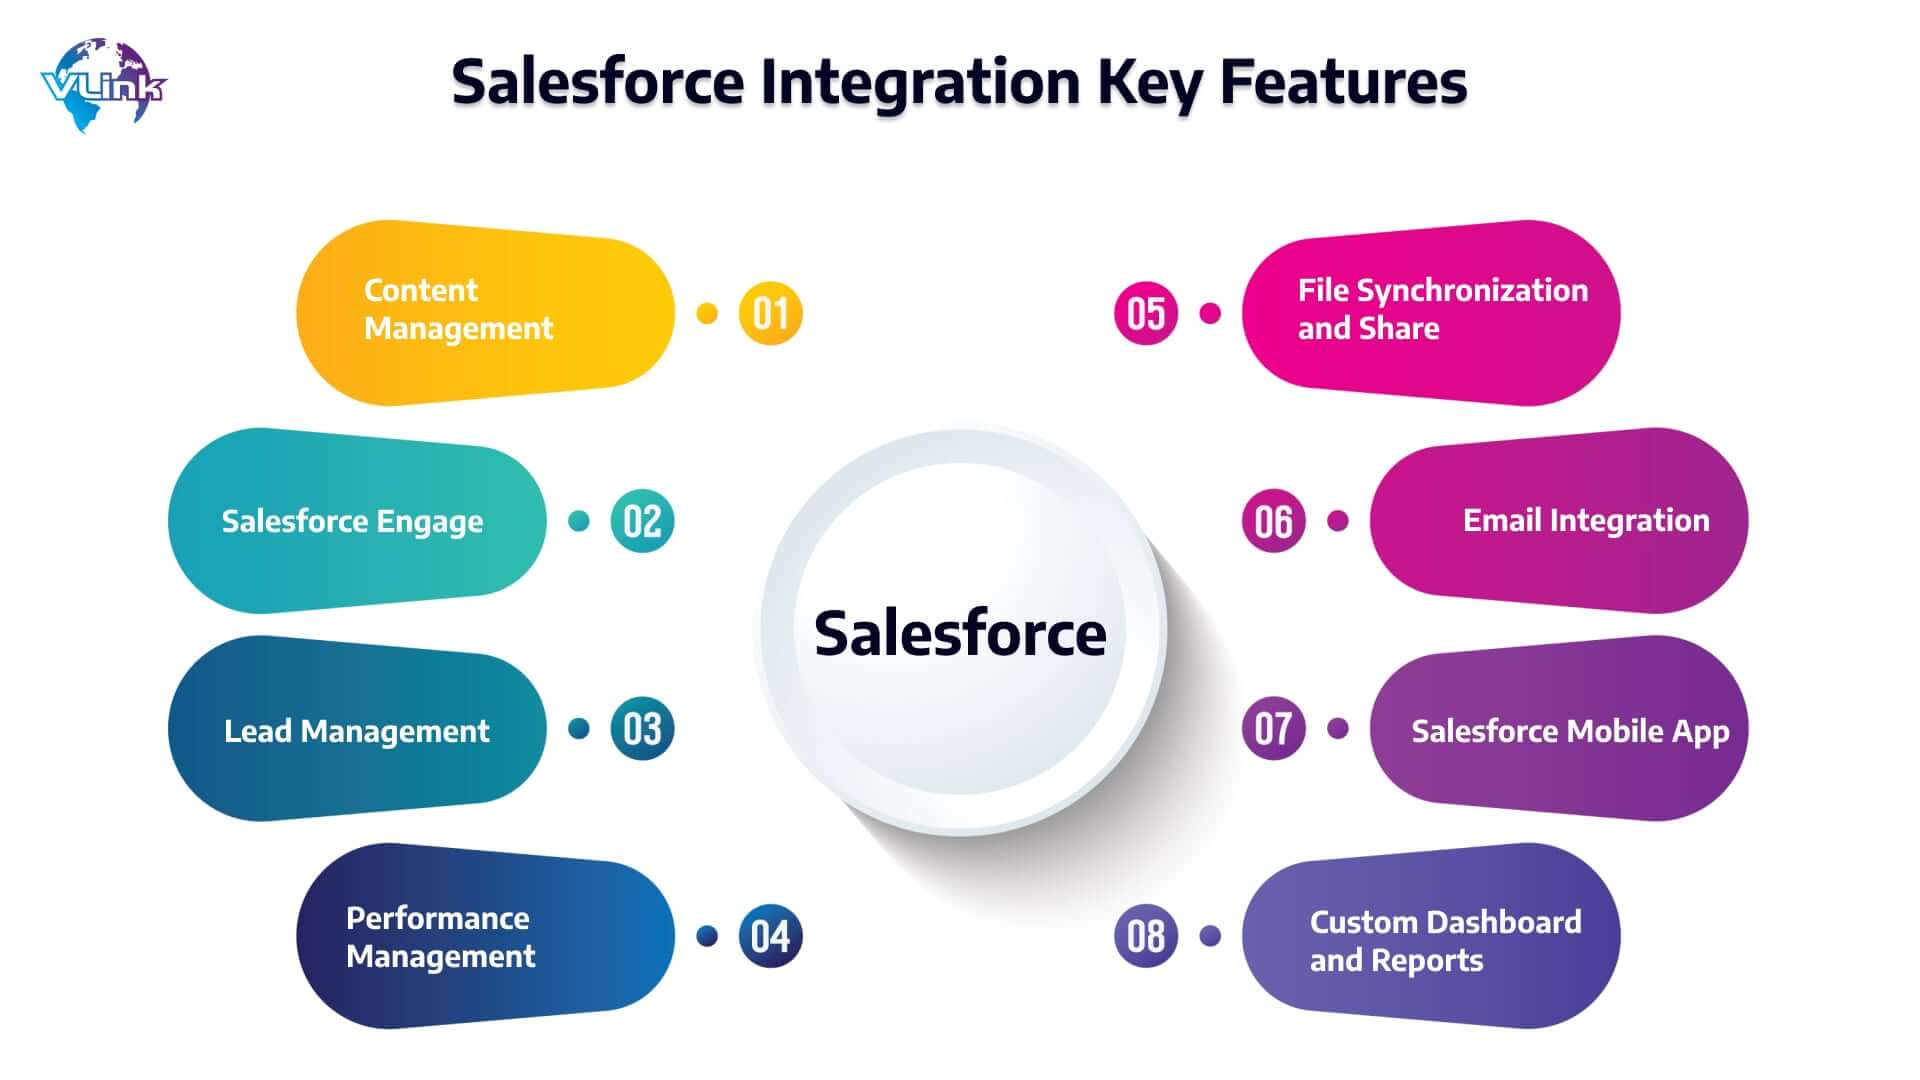 Key Features of Salesforce Integration Solution